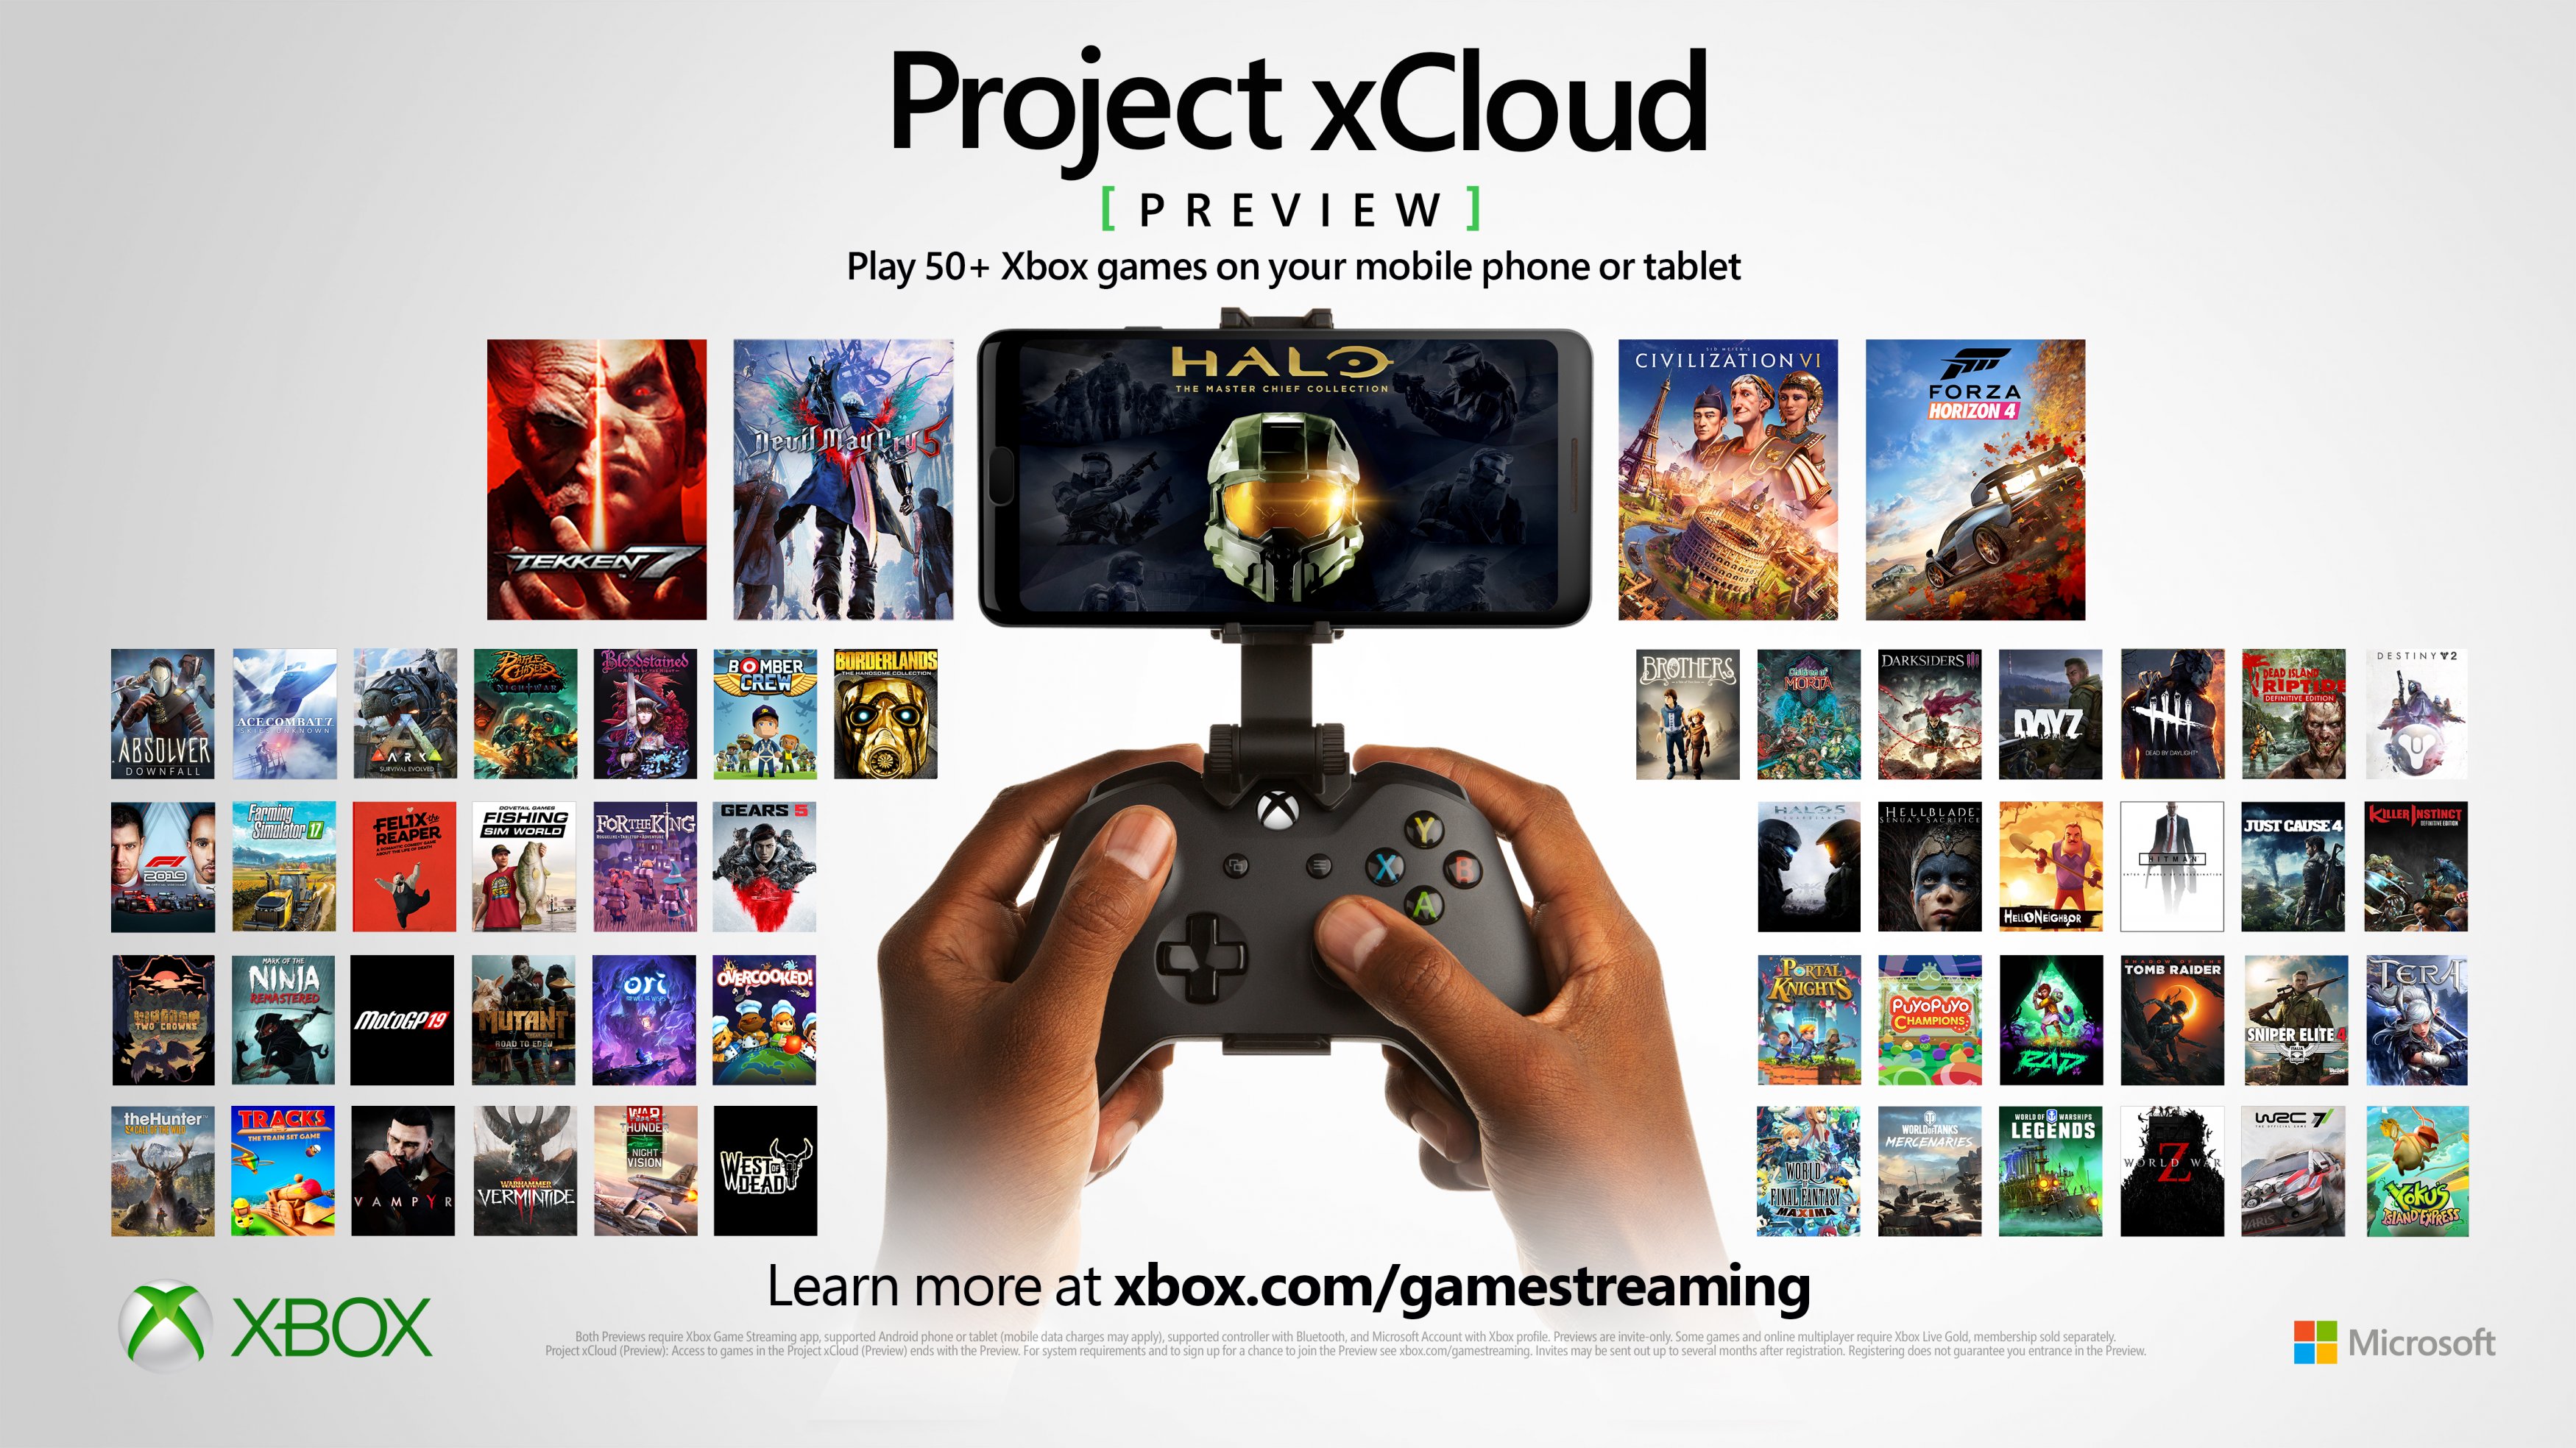 Phil Spencer hints at lower priced Xbox hardware, xCloud streaming sticks  and "Game Pass Platinum" | GBAtemp.net - The Independent Video Game  Community